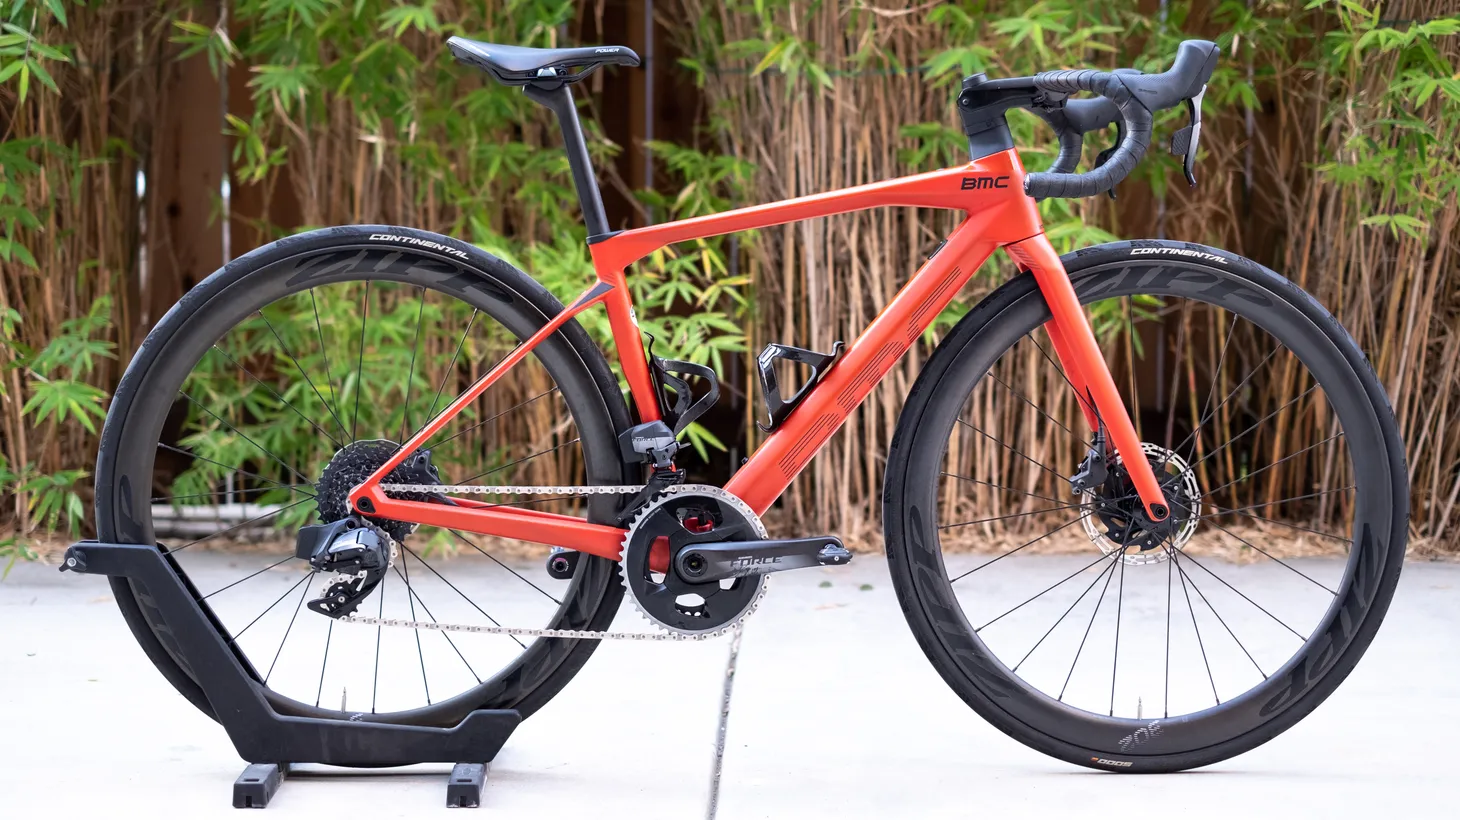 A 2020 model of the BMC Roadmachine, a 12-speed road bike built by Velo Pasadena, is seen in Culver City, California.